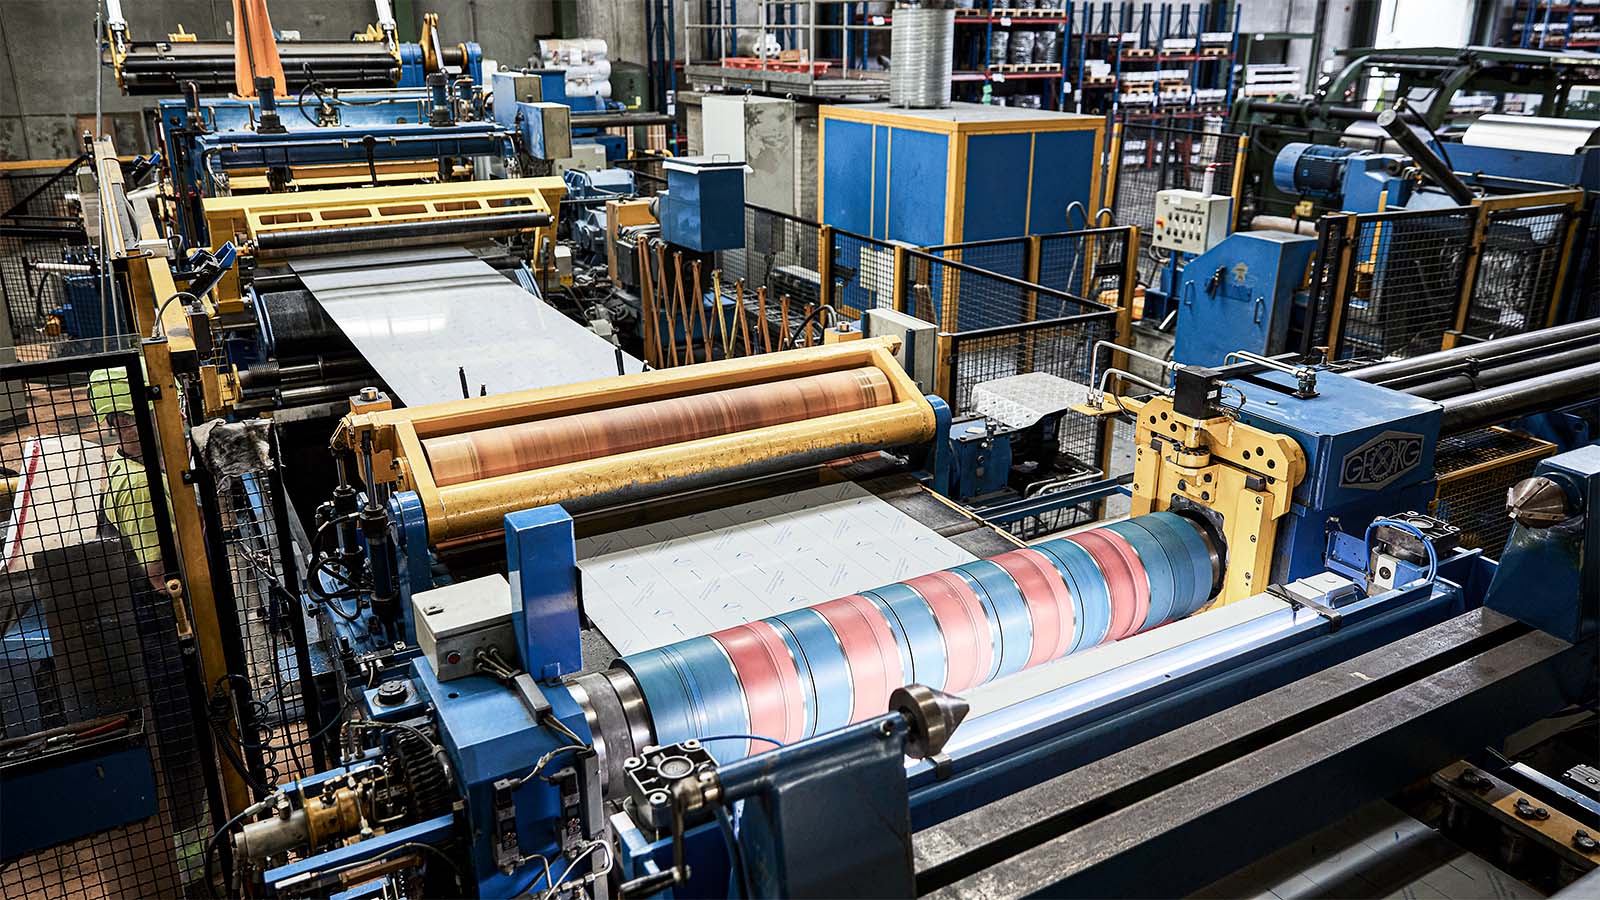 Slitting tools on a manufacturing line are used to produce narrow coils from a master coil